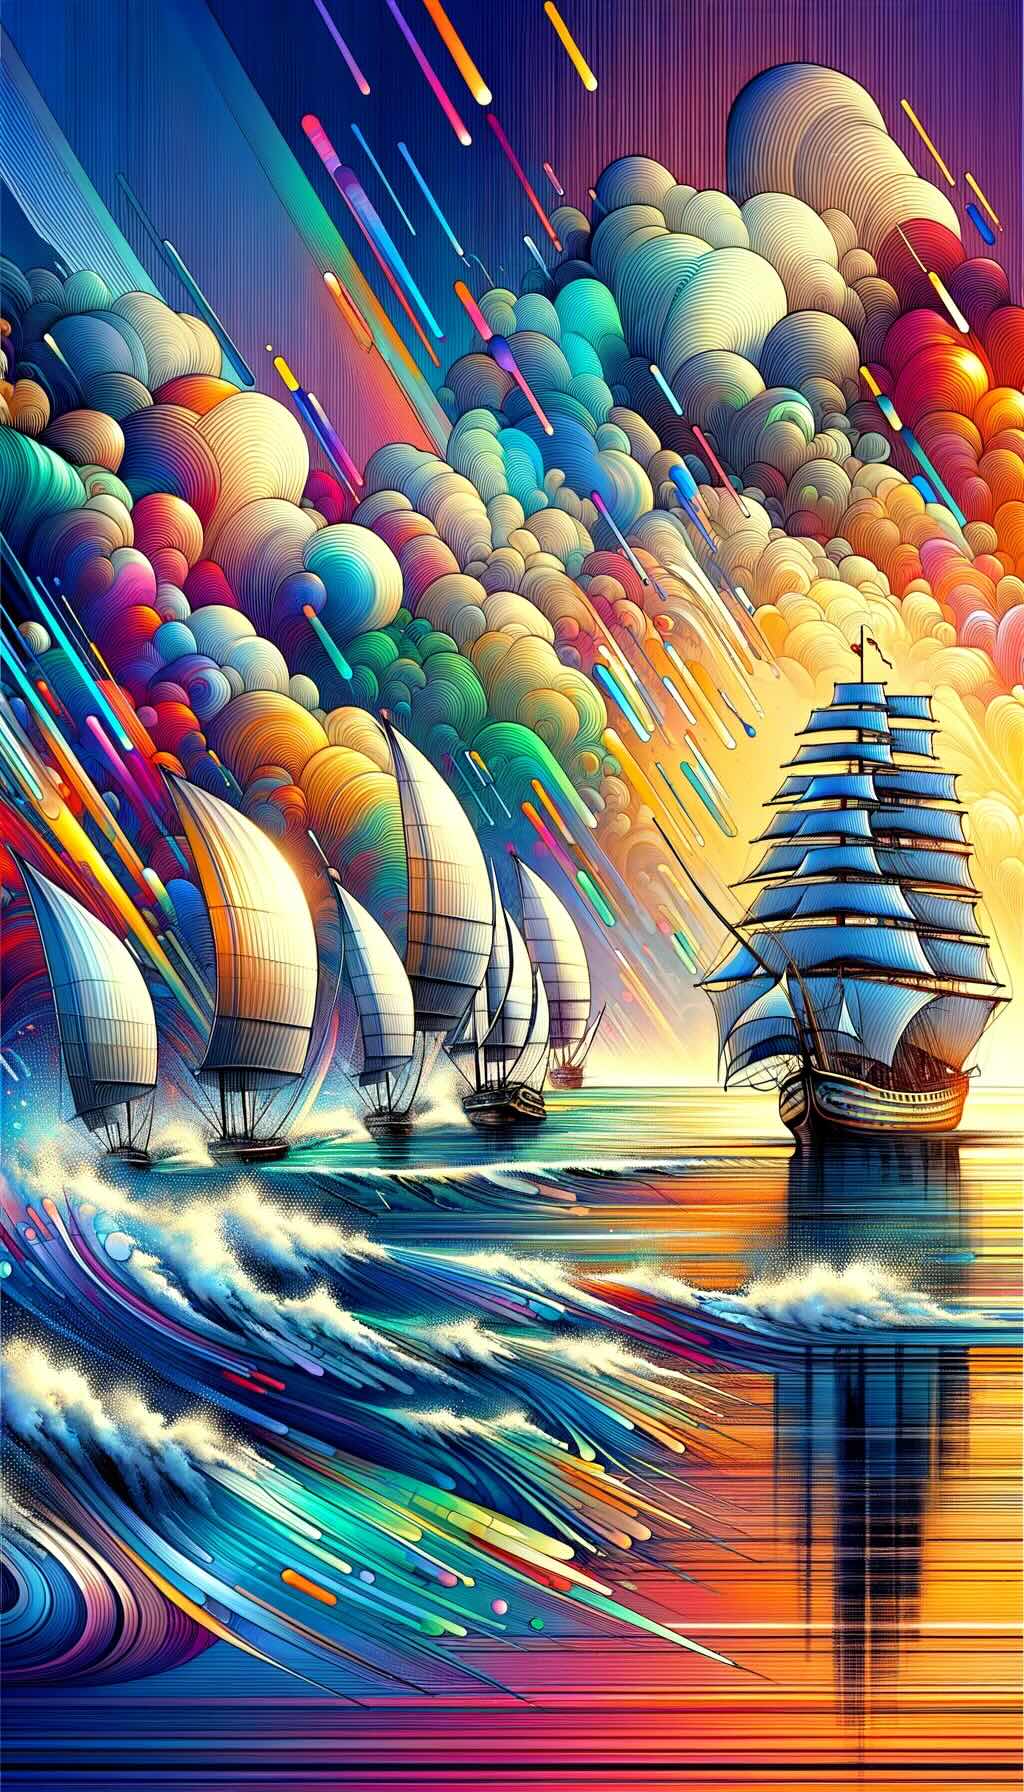 Trading flexibility and liquidity of ETFs and Mutual Funds. ETFs are depicted as agile sailboats, navigating the vibrant, fluctuating market waves, highlighting their intraday trading capabilities. In contrast, Mutual Funds are represented as majestic ships on a calm ocean, symbolizing their steady, end-of-day NAV pricing. This visual metaphor captures the essence of the investment landscape, balancing the immediacy of ETFs with the stability of Mutual Funds.